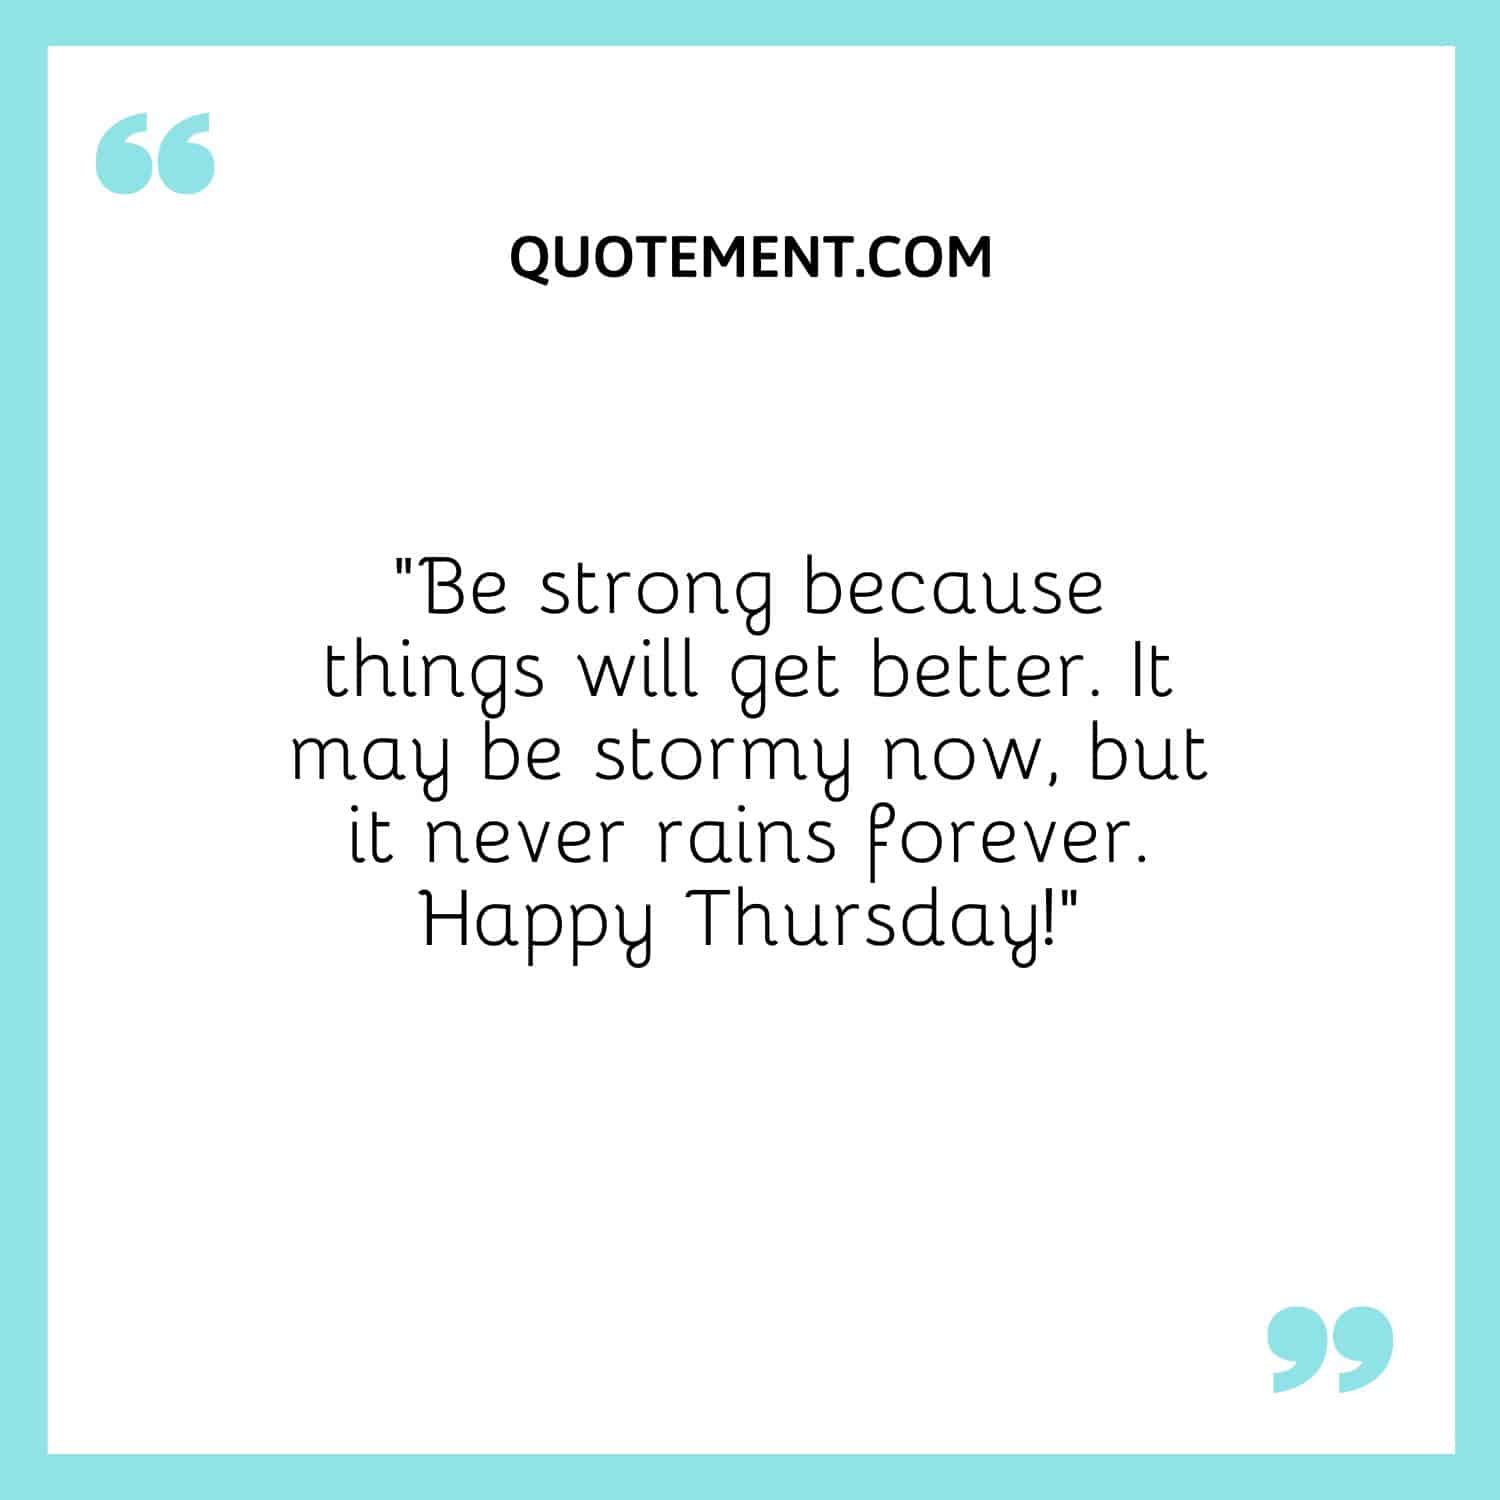 “Be strong because things will get better. It may be stormy now, but it never rains forever. Happy Thursday!”